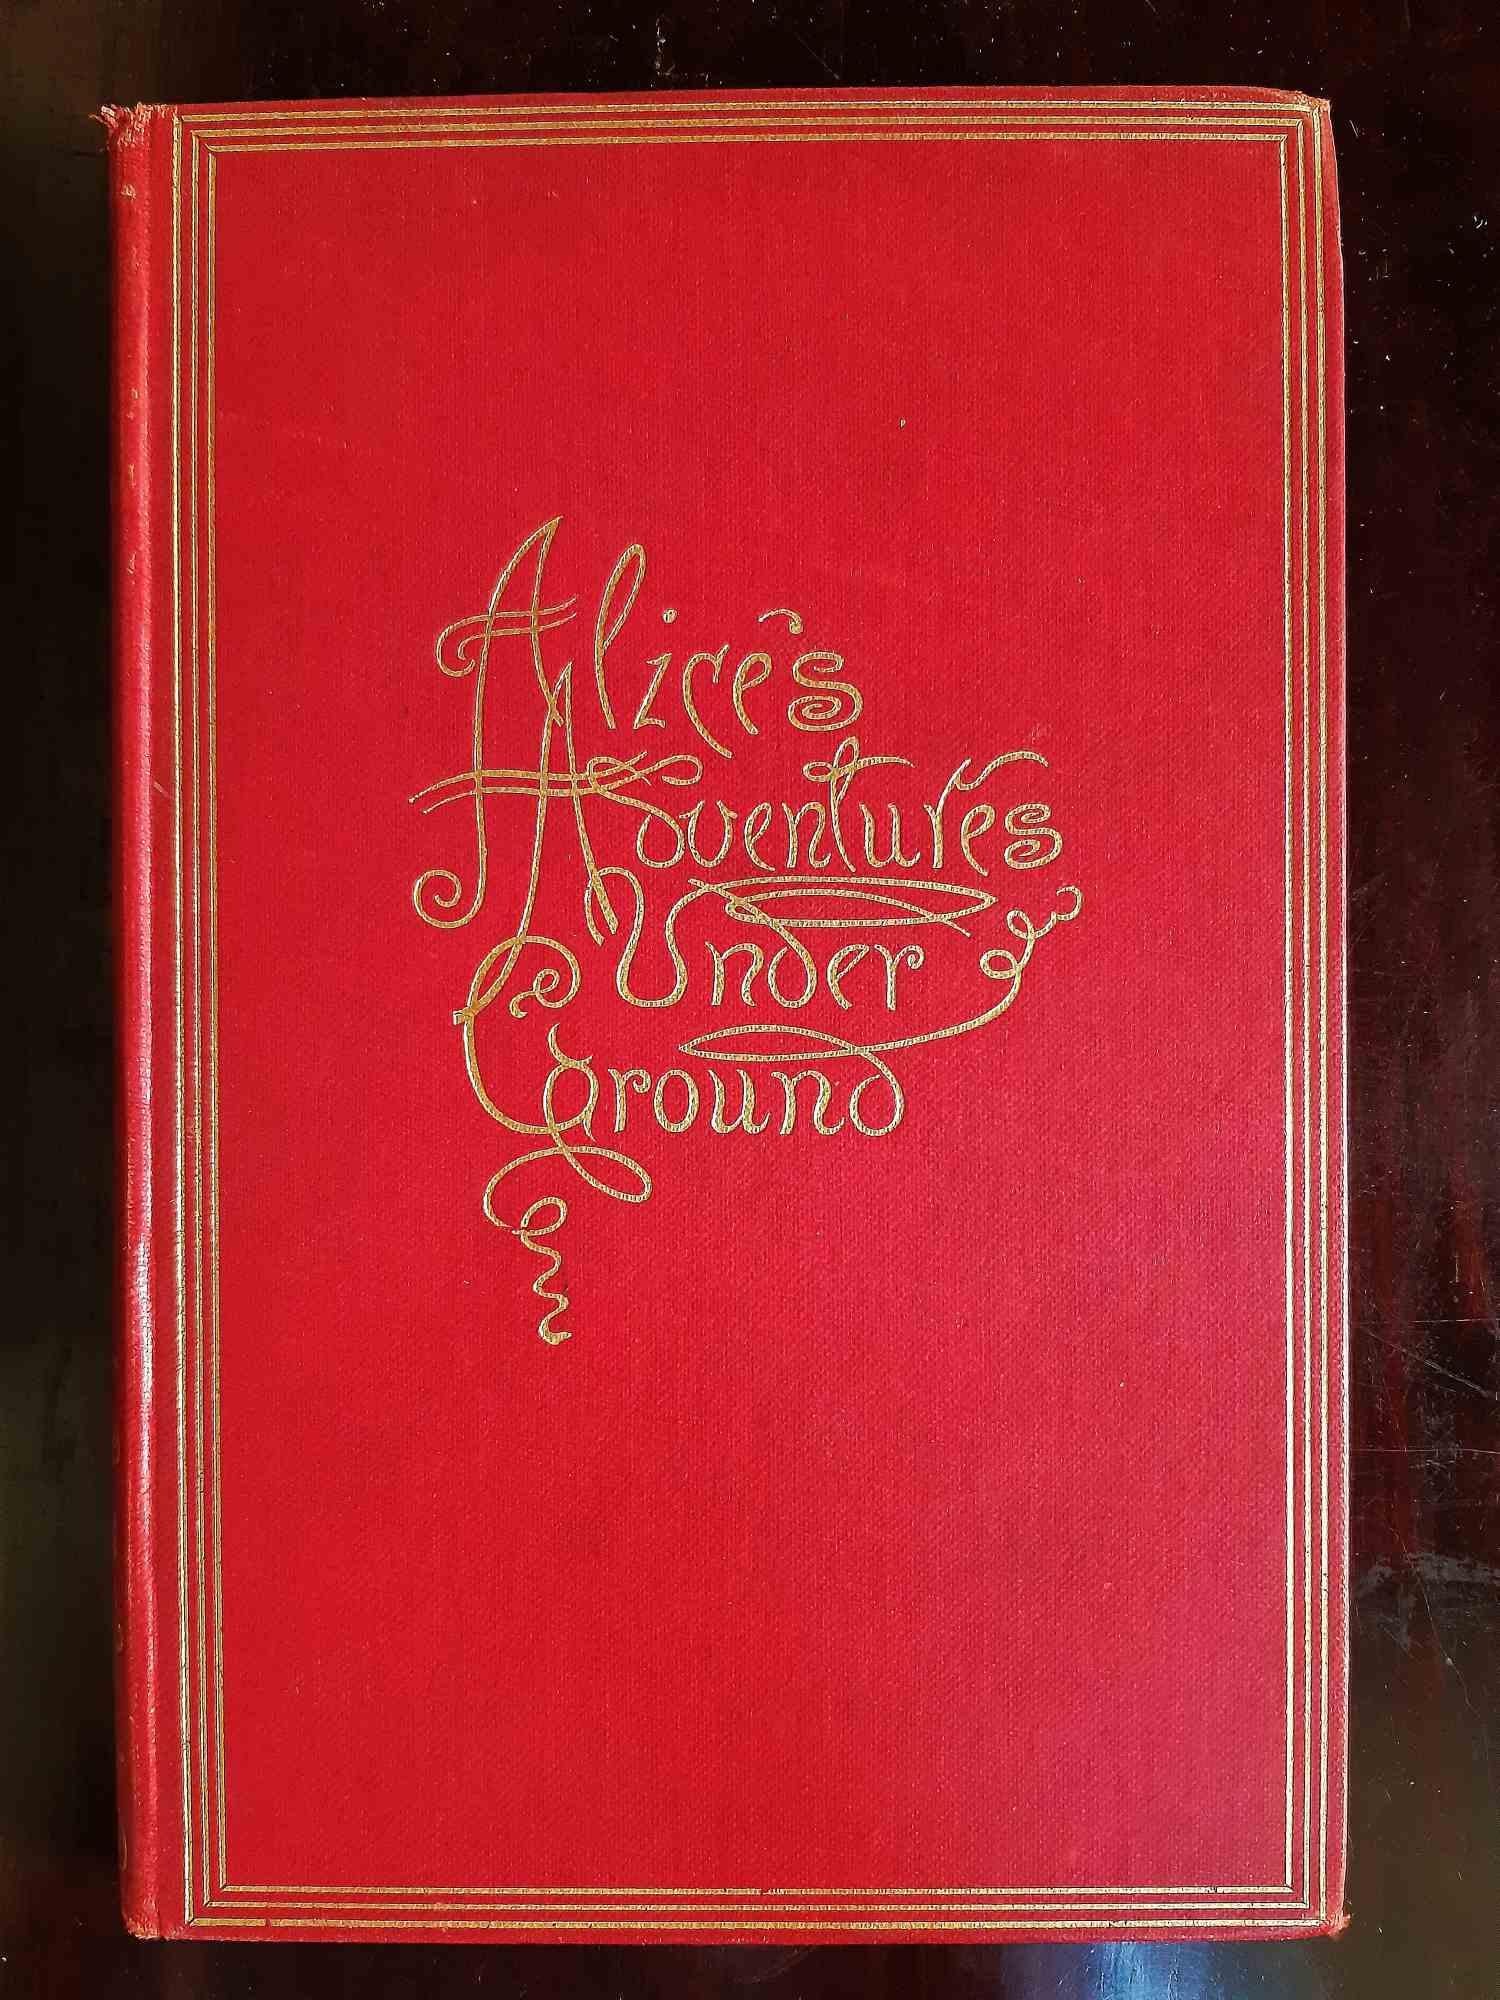 lewis carroll first edition